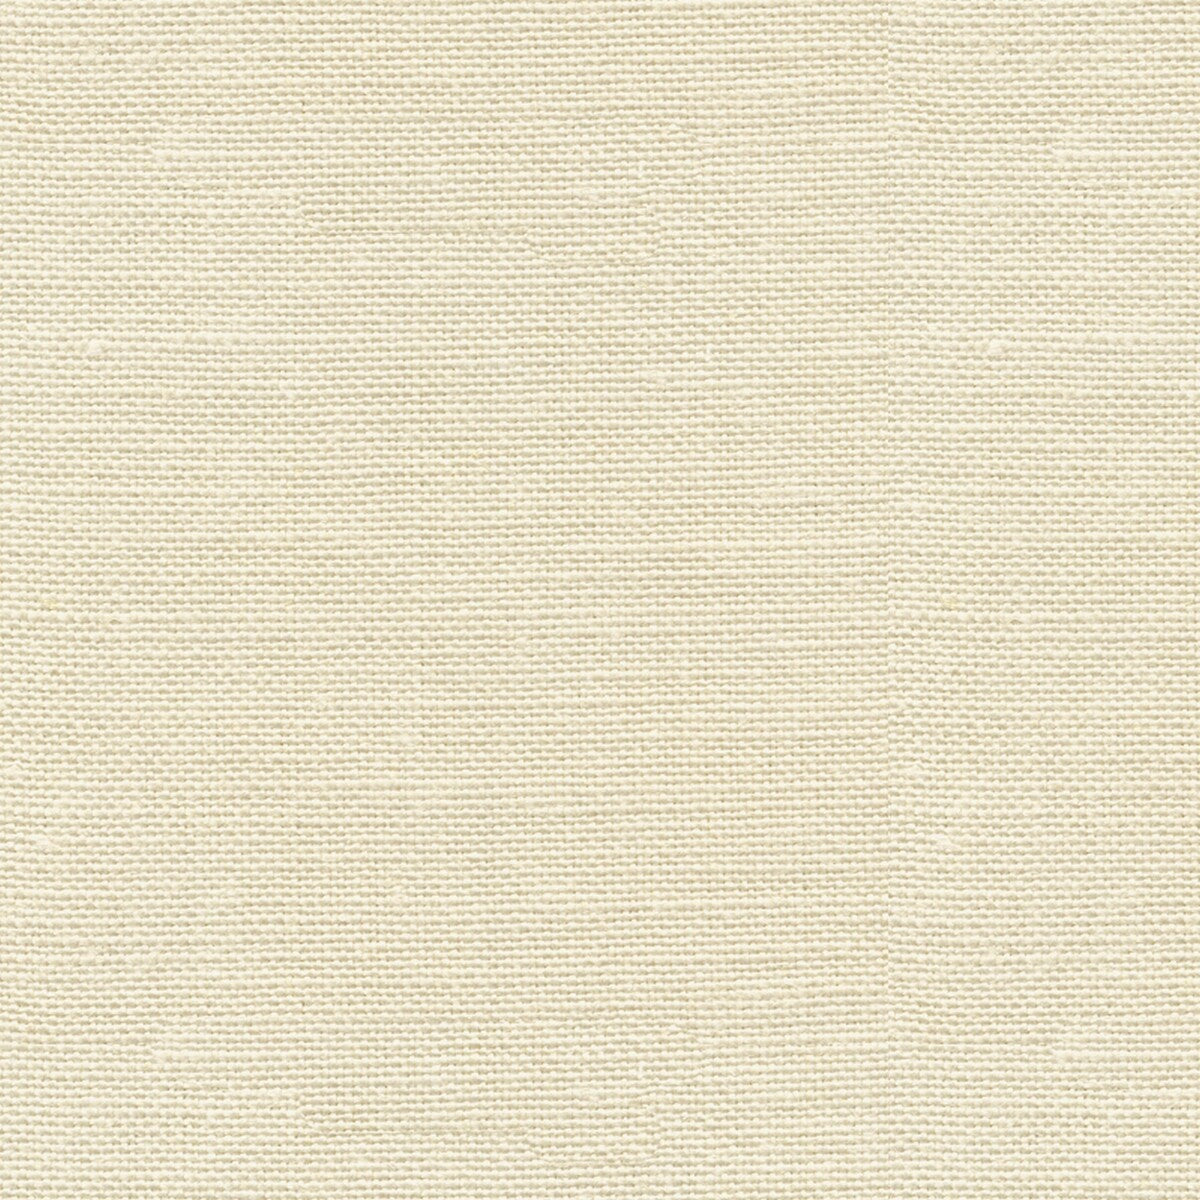 Newport fabric in ivory color - pattern ED85116.110.0 - by Threads in the Threads Spring collection